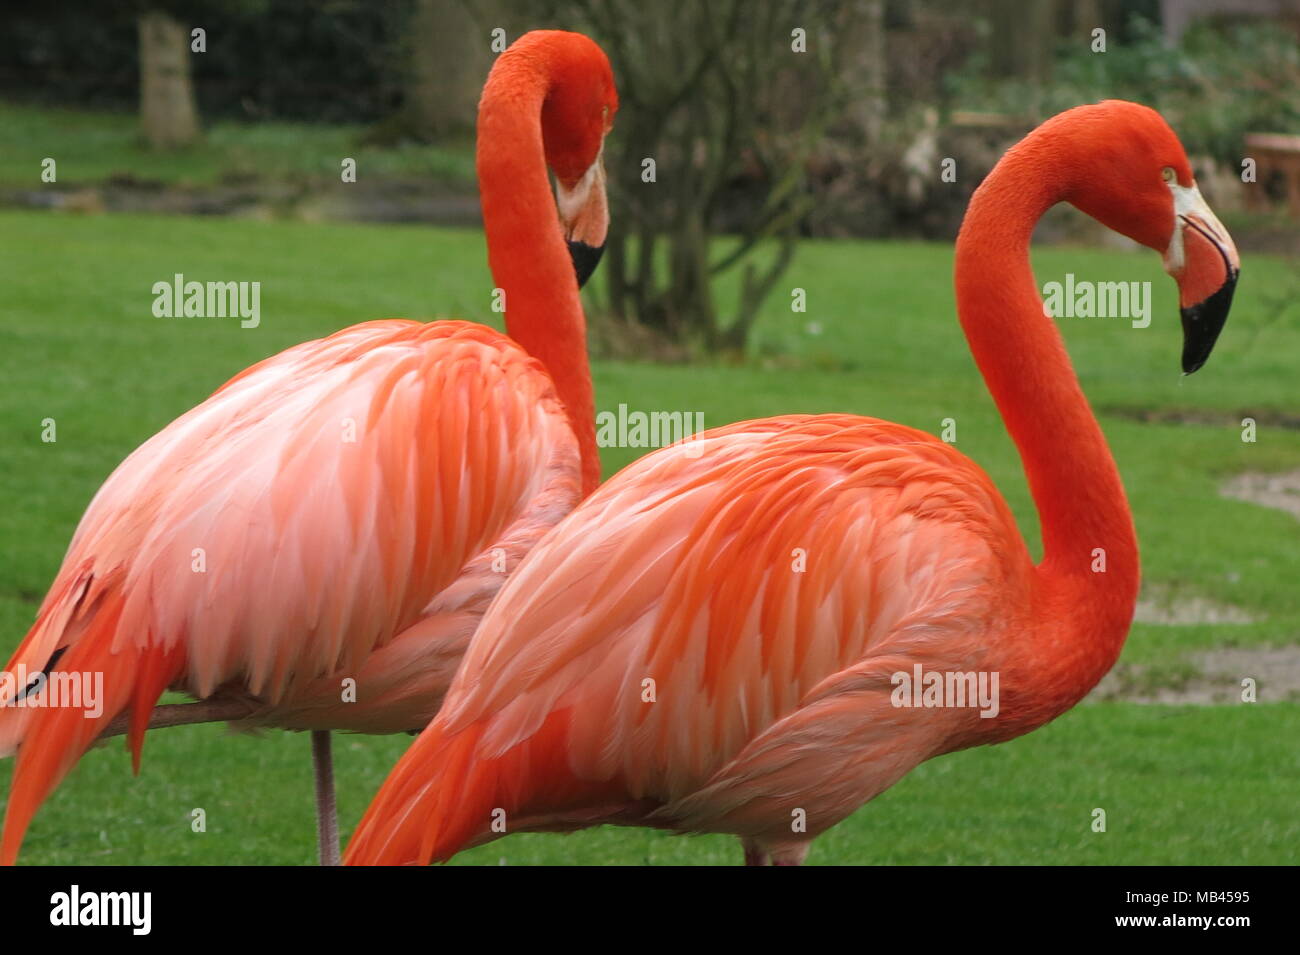 A pair of brightly coloured flamingos, whose orange plumage is very striking against the fresh green grass of spring time Stock Photo